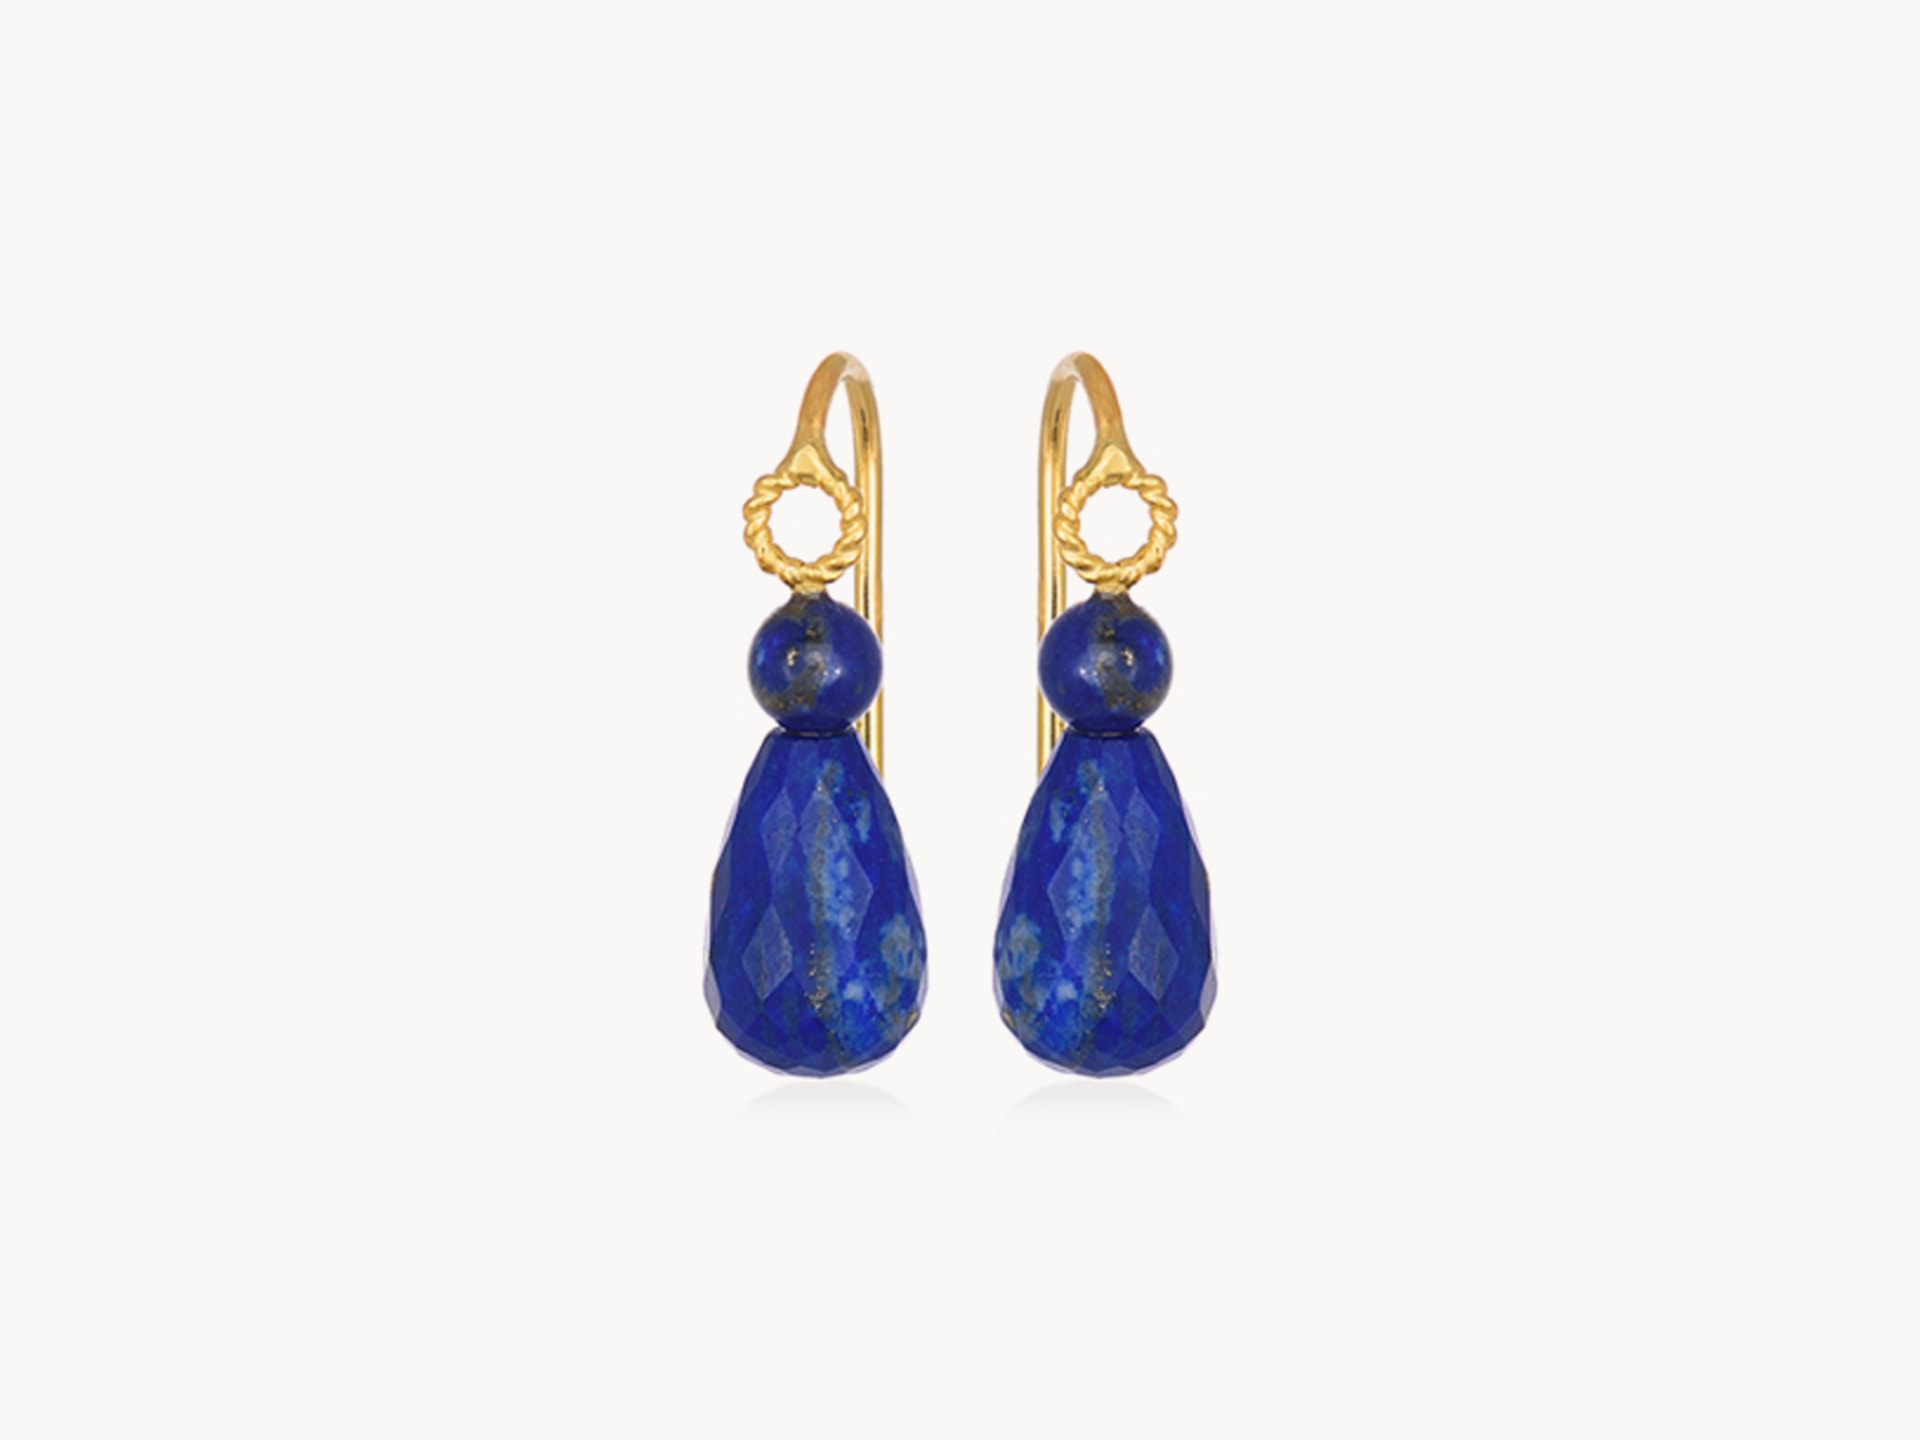 Small Drop Earrings with Lapis